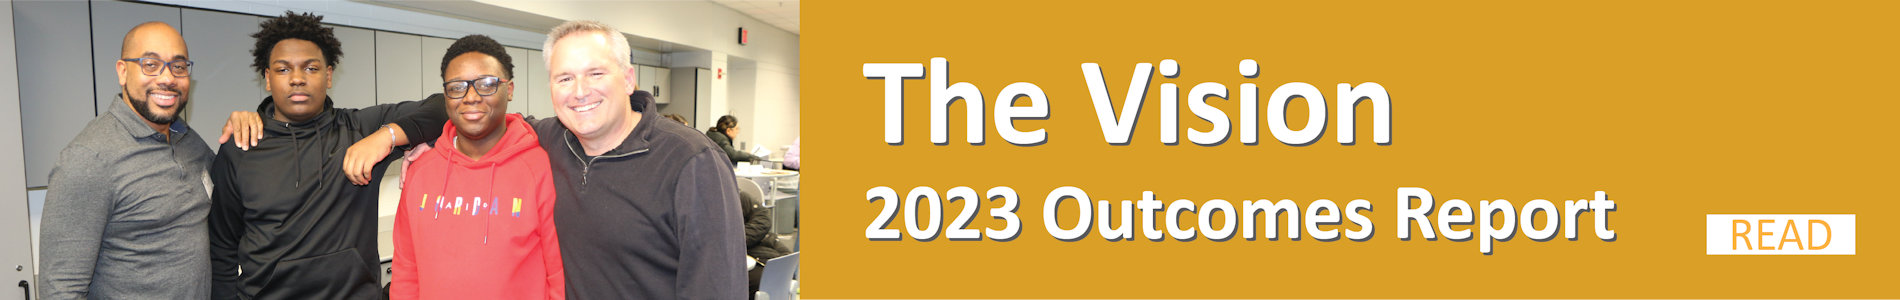 The Vision 2023 Outcomes Report